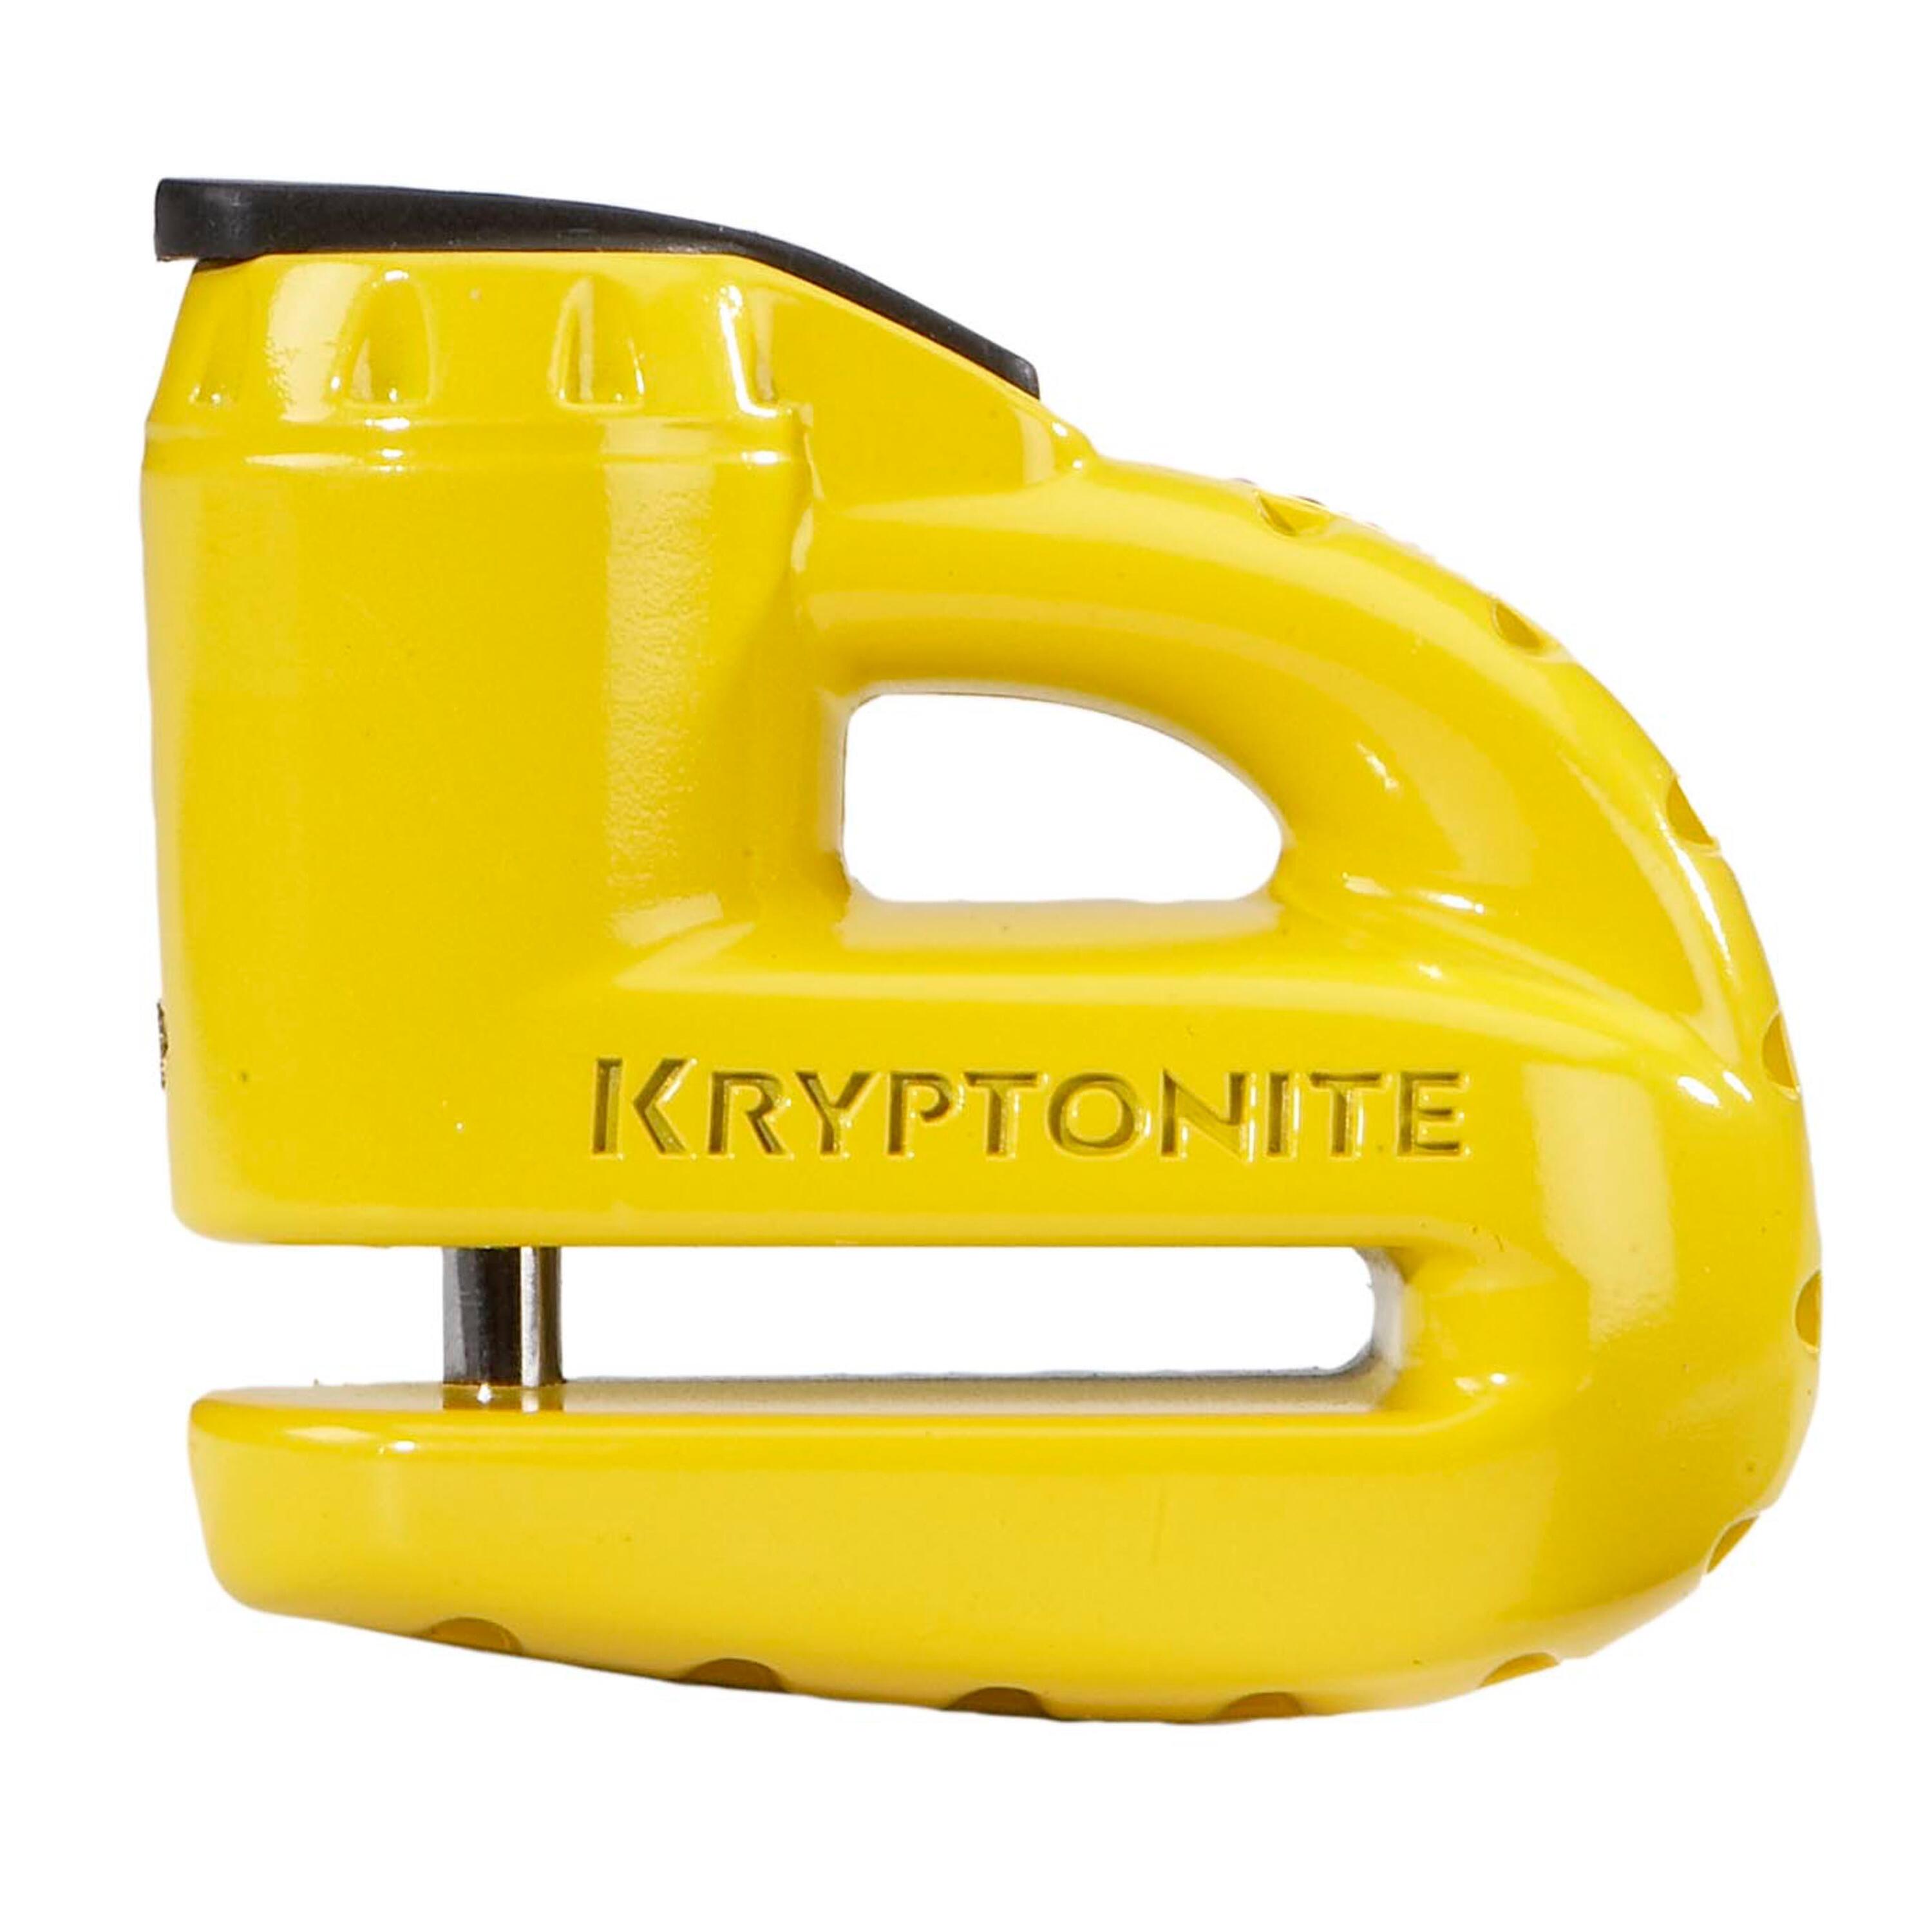 Kryptonite Keeper 5-S Disc Lock - with Reminder Cable 1/5